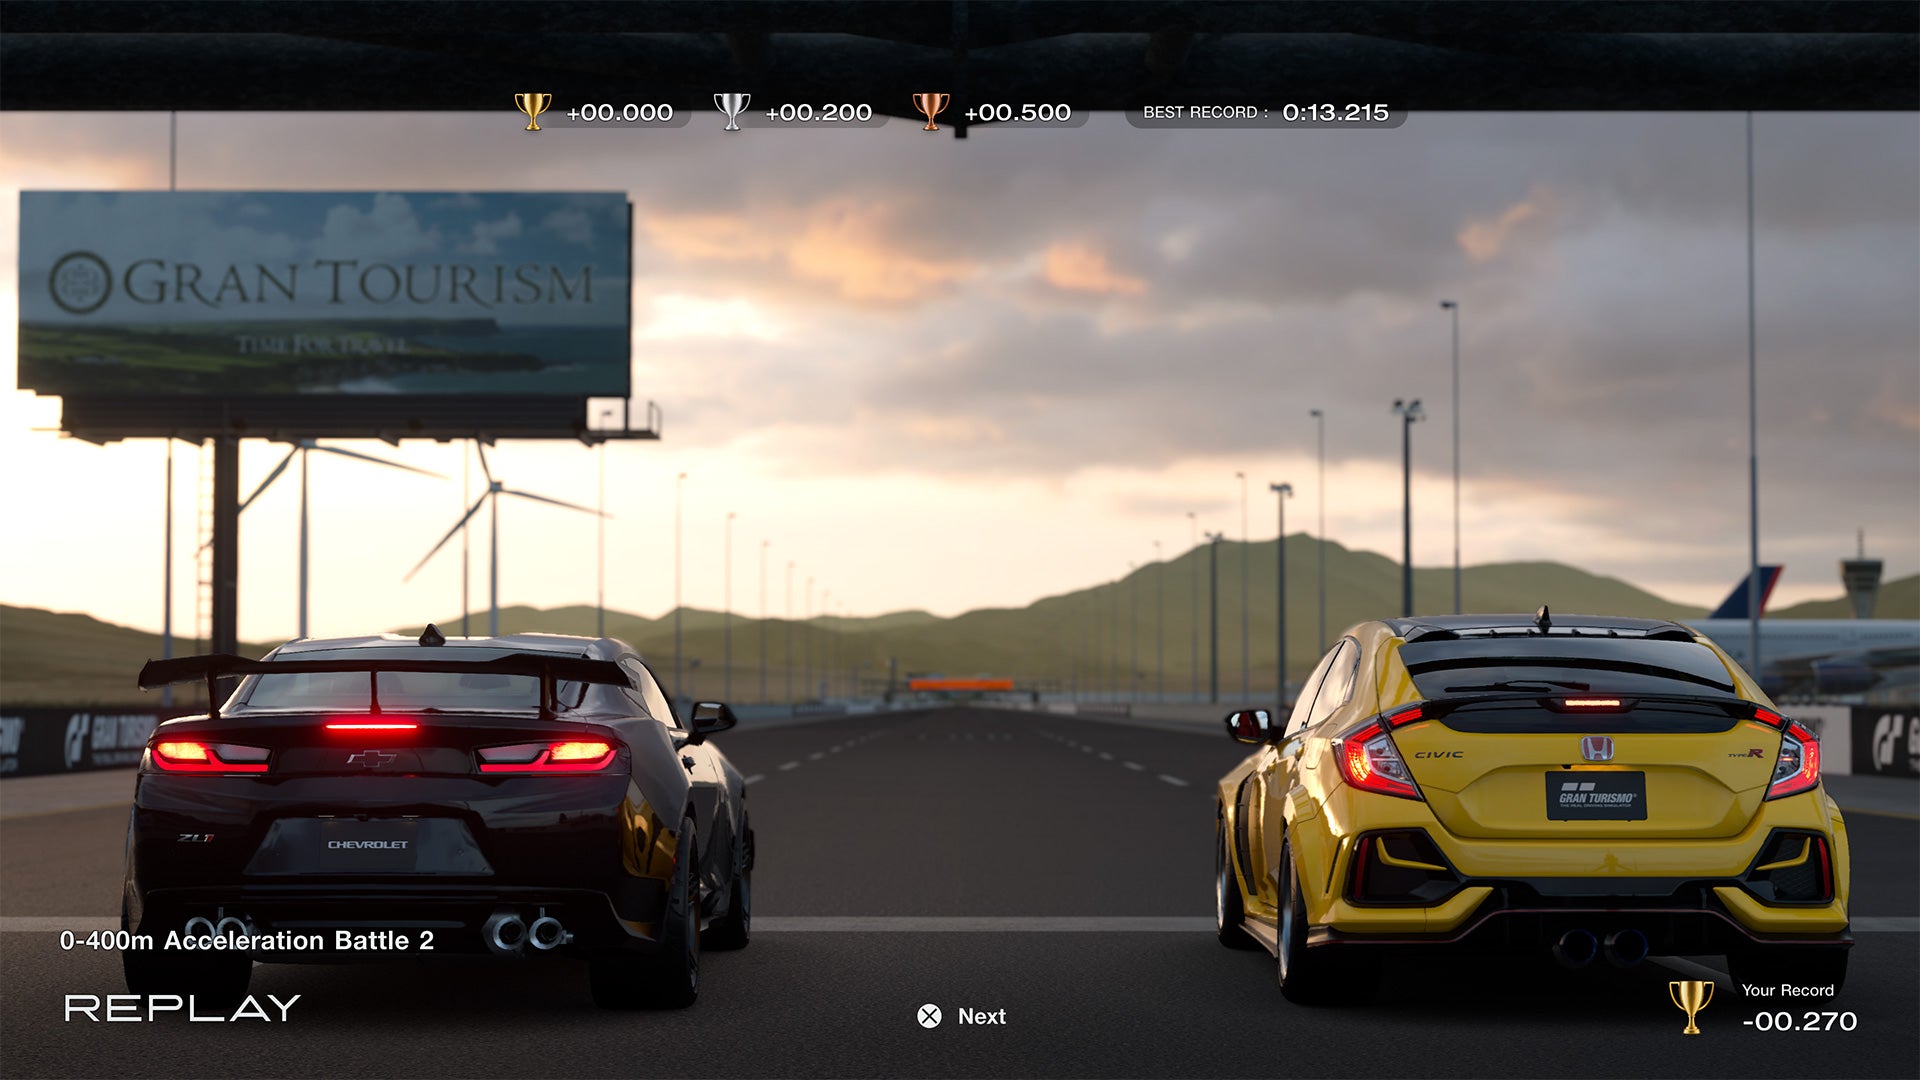 2022 best games Gran Turismo 7 - a black Chevrolet and yellow Honda Civic line up at the starting grid at dusk